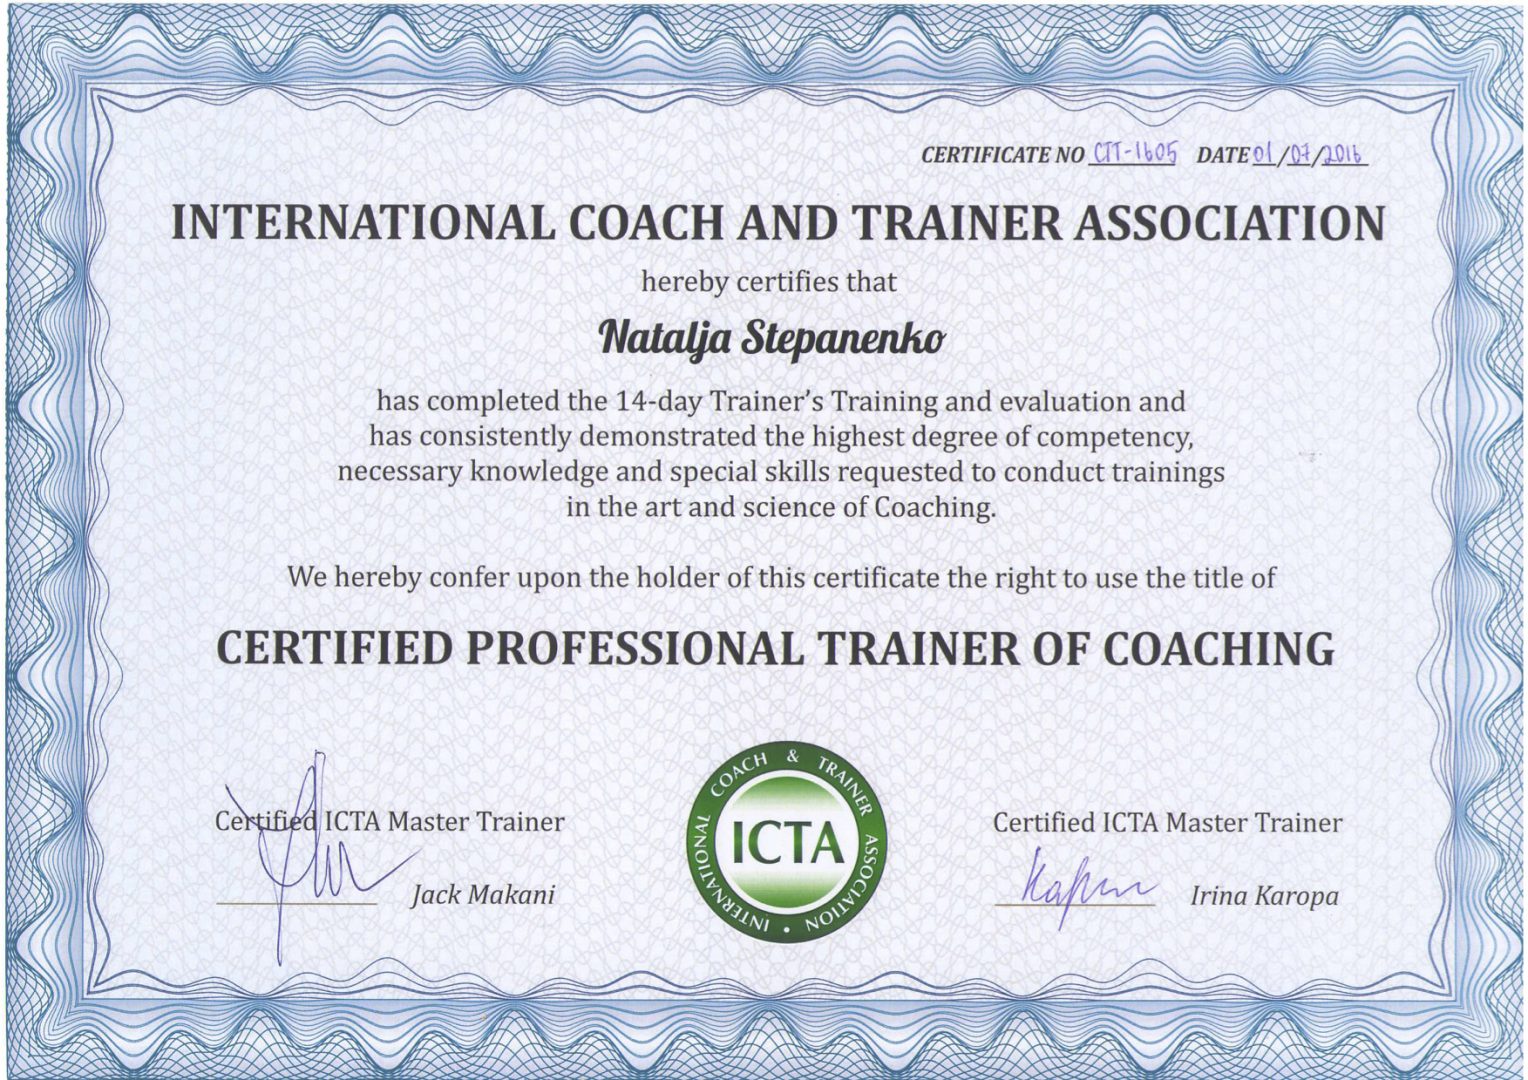 certificate-coucing-trainer